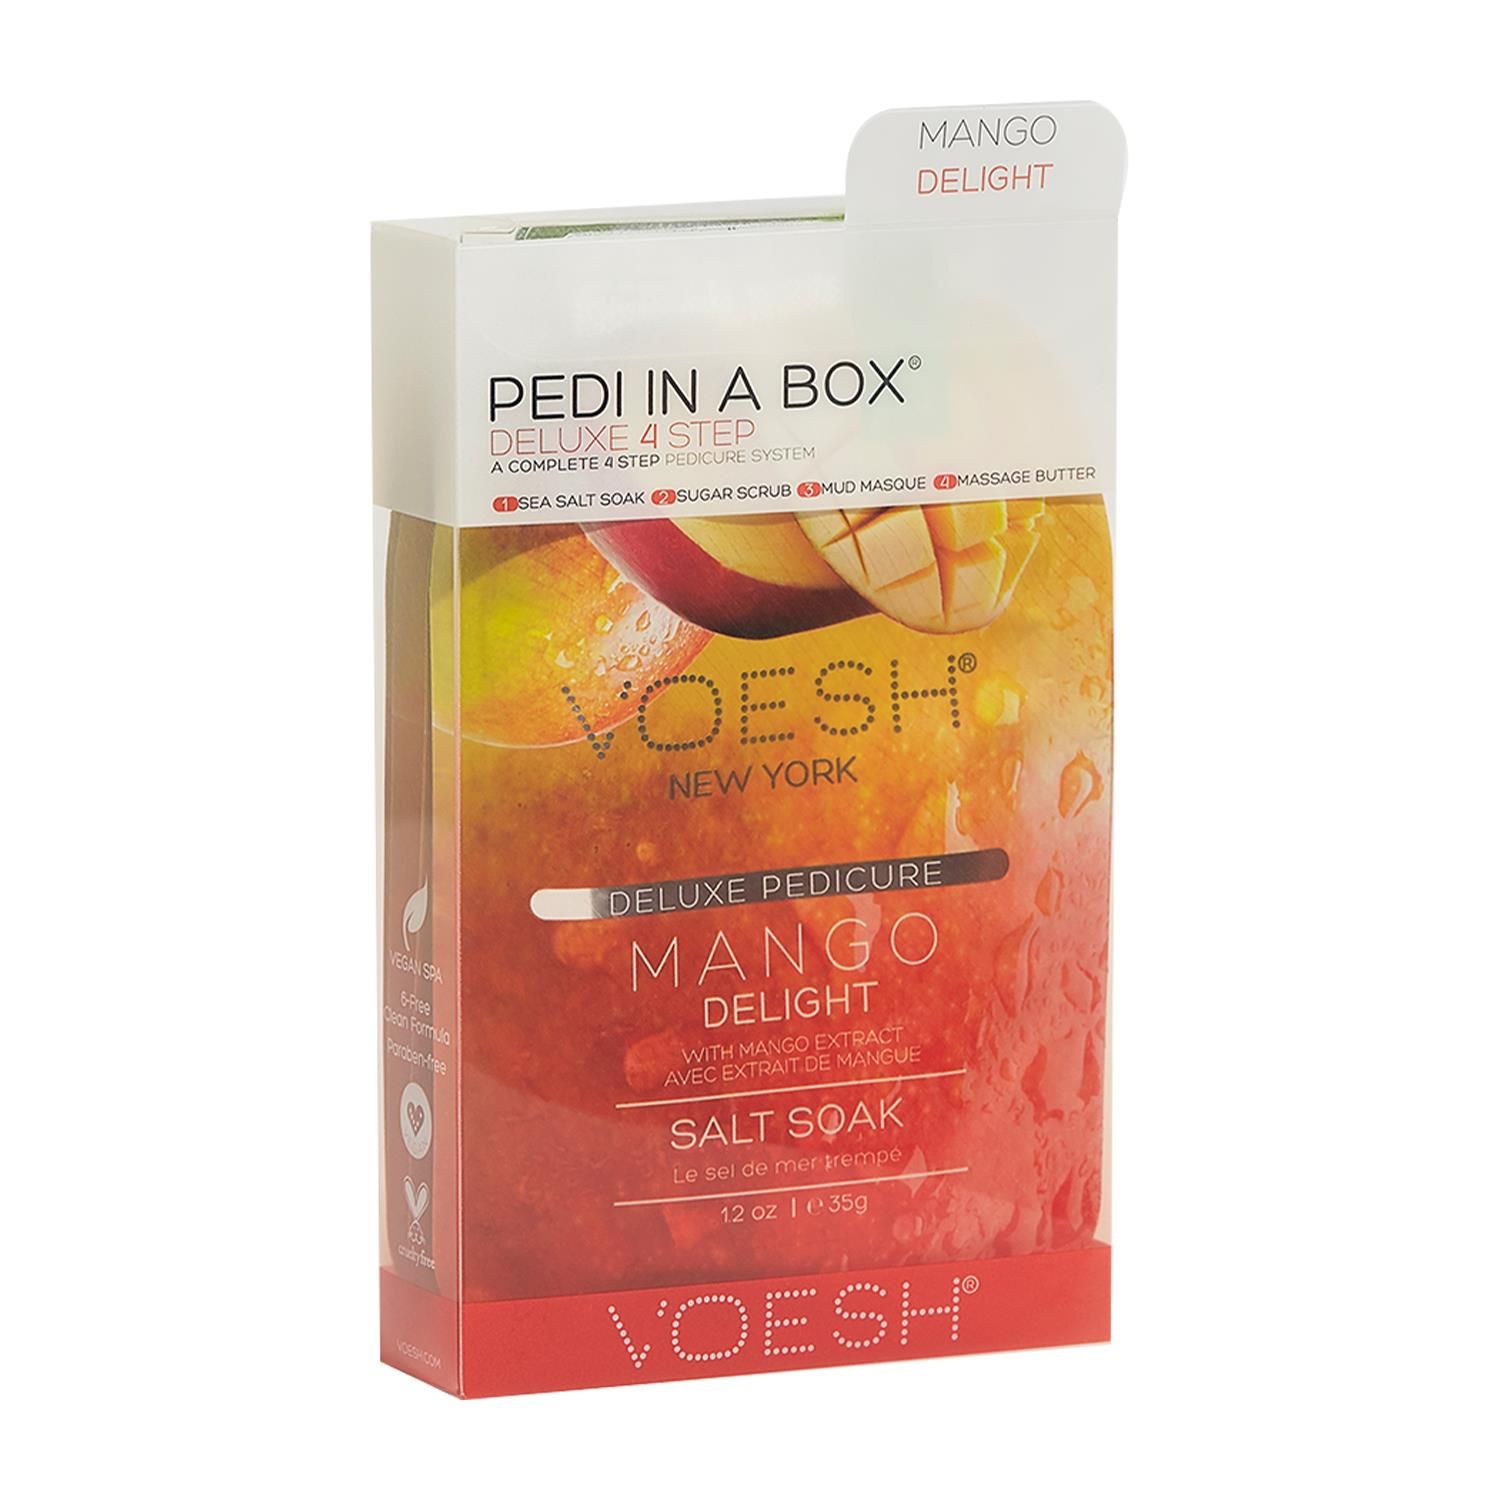 Voesh Mango Delight Deluxe 4 Step Pedicure In A Box with Mango Extract.  The Cleanest And Most Hygienic Spa Pedicure Solution. Enriched With Key Ingredients To Give Your Feet The Nutrition It Needs. Each Product Is Individually Packed With The Right Amount For A Single Pedicure.

The Perfect Pedi For:
DIY At-Home Pedicure
Date Night
Bachelorette Parties
Girls’ Night In

The kit contains:
Sea Salt Soak: This soak helps relieve tension, stiffness, minor aches and discomfort in your feet. It helps detox and deodorize the feet.
Sugar Scrub: The scrub gently exfoliates dead skin cells and helps soften your feet. Perfect for use on the soles on your feet.
Mud Masque: The masque removes deep-seated impurities in your skin leaving your feet feeling clean and revived.
Massage Cream: The massage cream hydrates and soothes skin. It softens the soles of your feet and helps prevent dryness and roughness.

4 Step Includes
Sea Salt Soak 35g: to detox & deodorize the feet.
Sugar Scrub 35g: to gently exfoliate dead skin.
Mud Masque 35g: to deep cleanse impurities.
Massage Butter 35g: to hydrate and soothe skin.